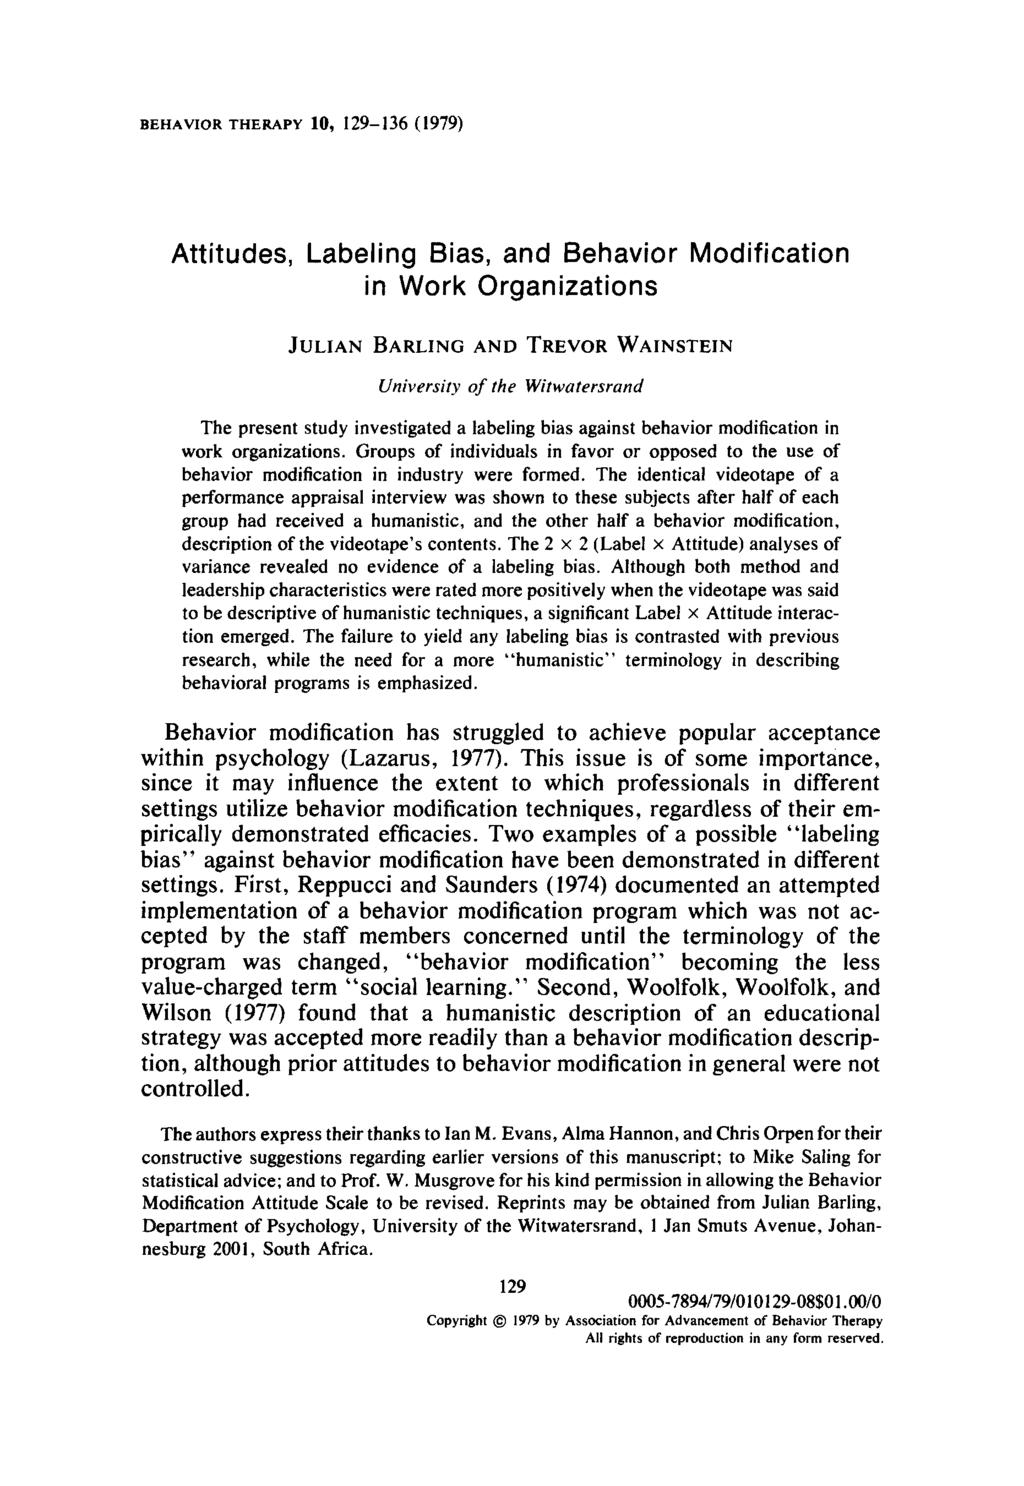 BEHAVIOR THERAPY 10, 129--136 (1979) Attitudes, Labeling Bias, and Behavior Modification in Work Organizations JULIAN BARLING AND TREVOR WAINSTEIN University of the Witwatersrand The present study